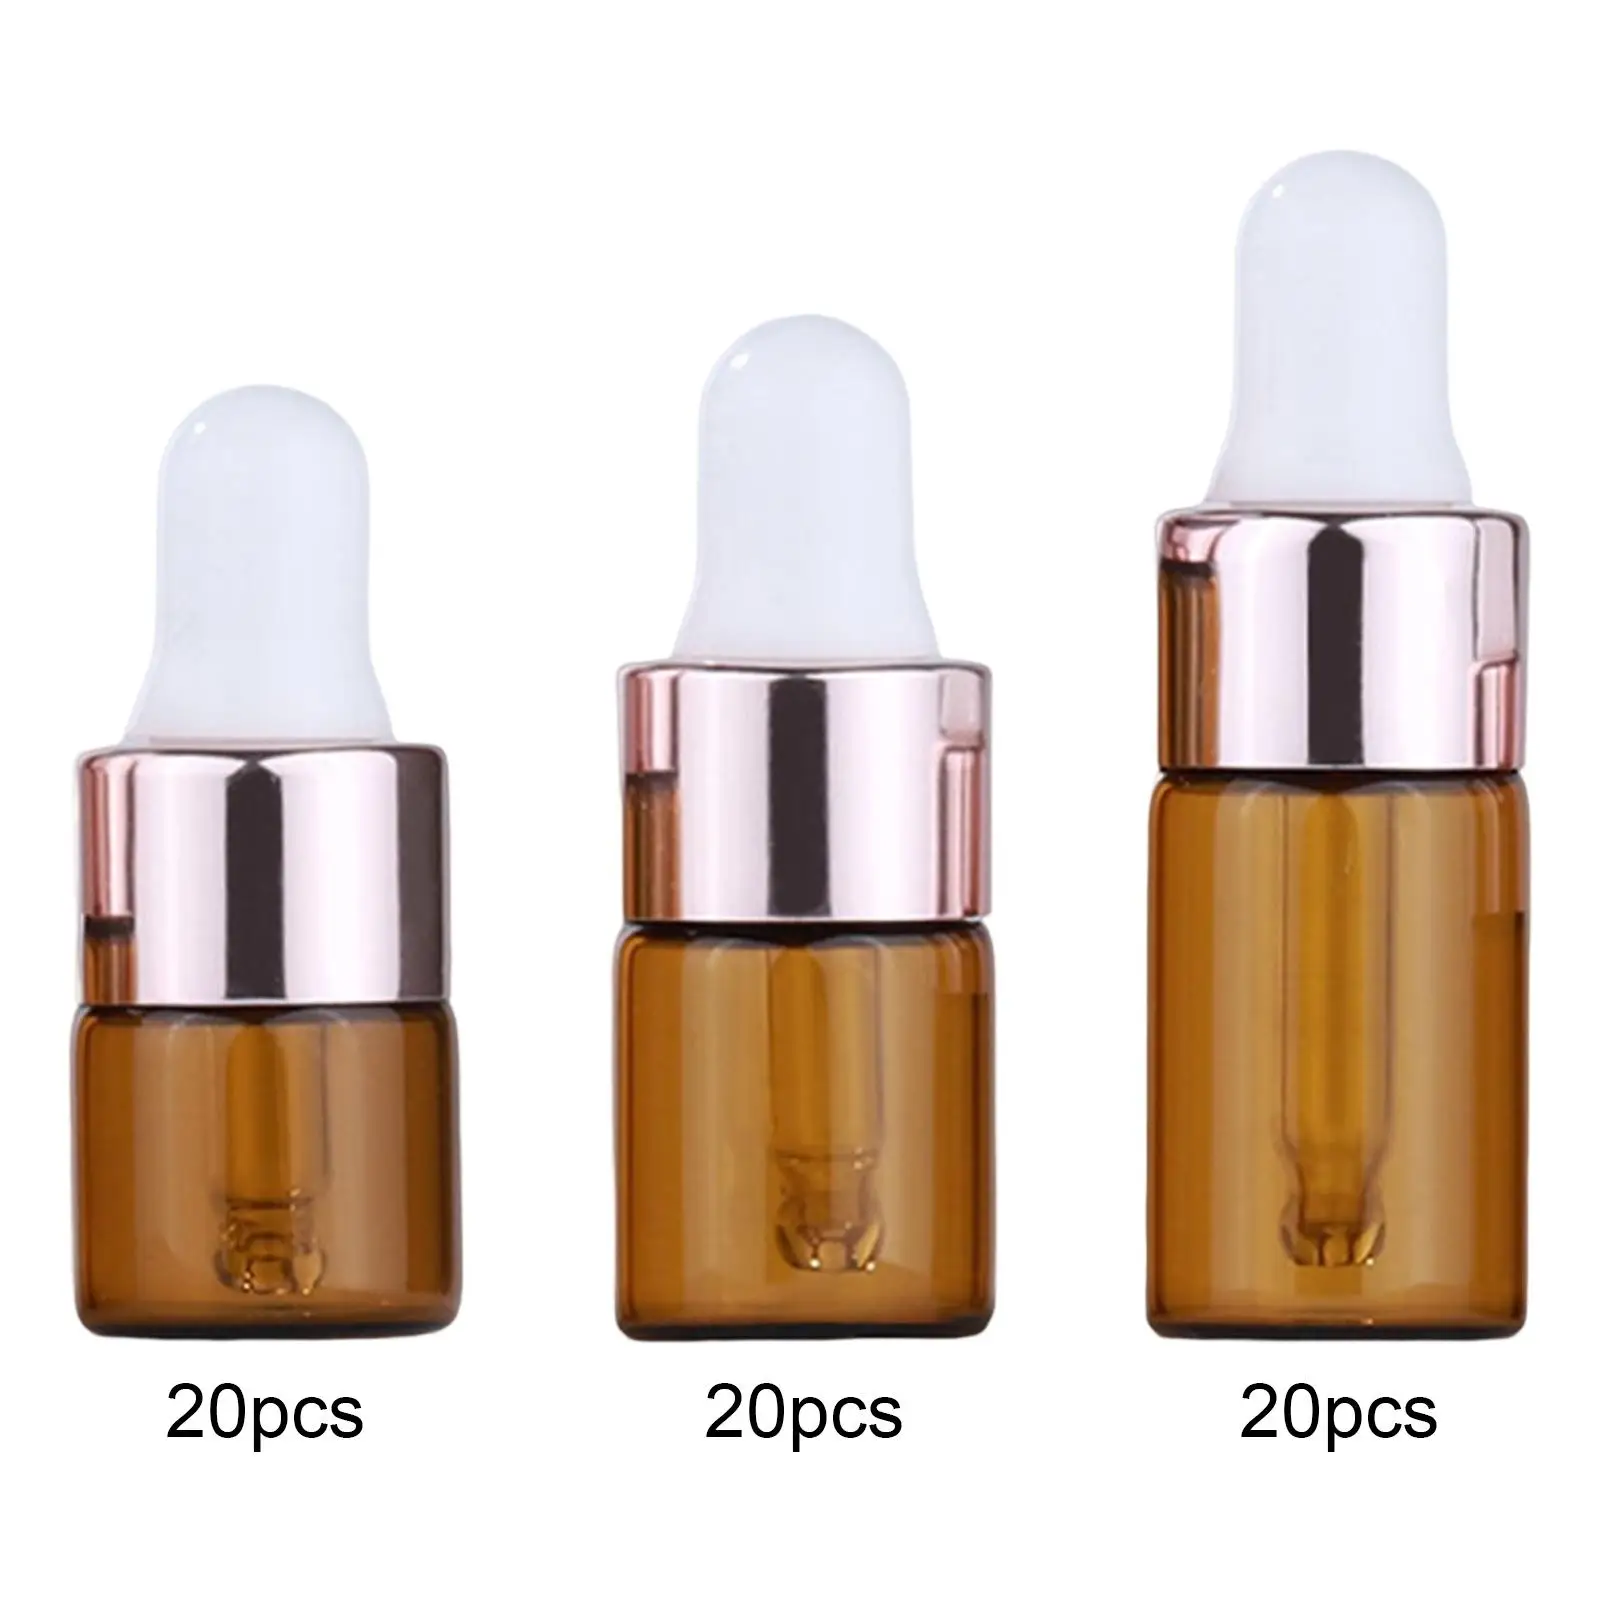 20x Essential Oil Dropper Bottles Containers Travel Bottles Refillable with Glass Eye Droppers Vials for Essential Oil Cosmetic